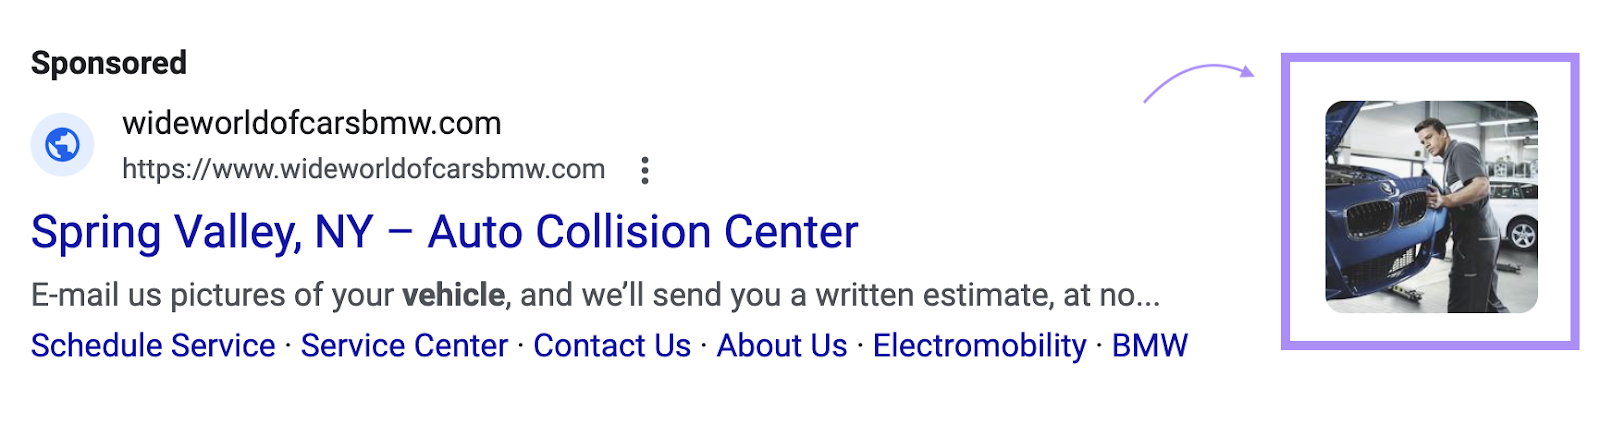 An image extension added to a Google search ad